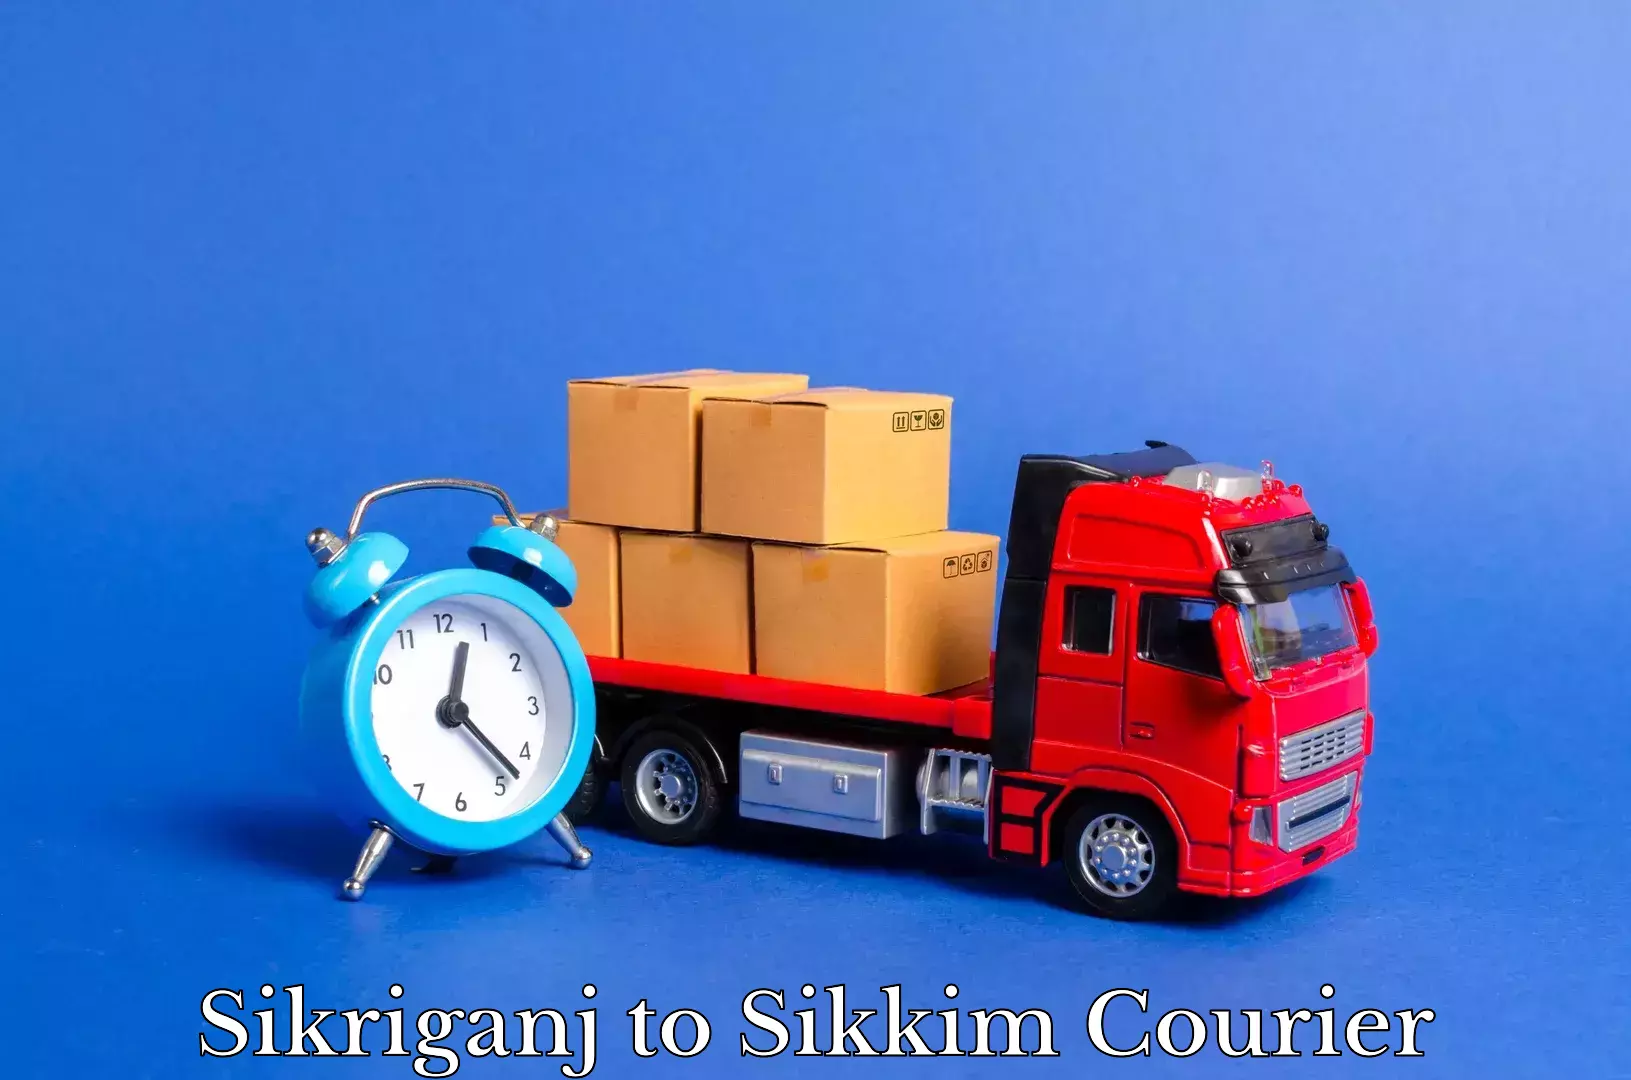 Professional home relocation Sikriganj to Sikkim